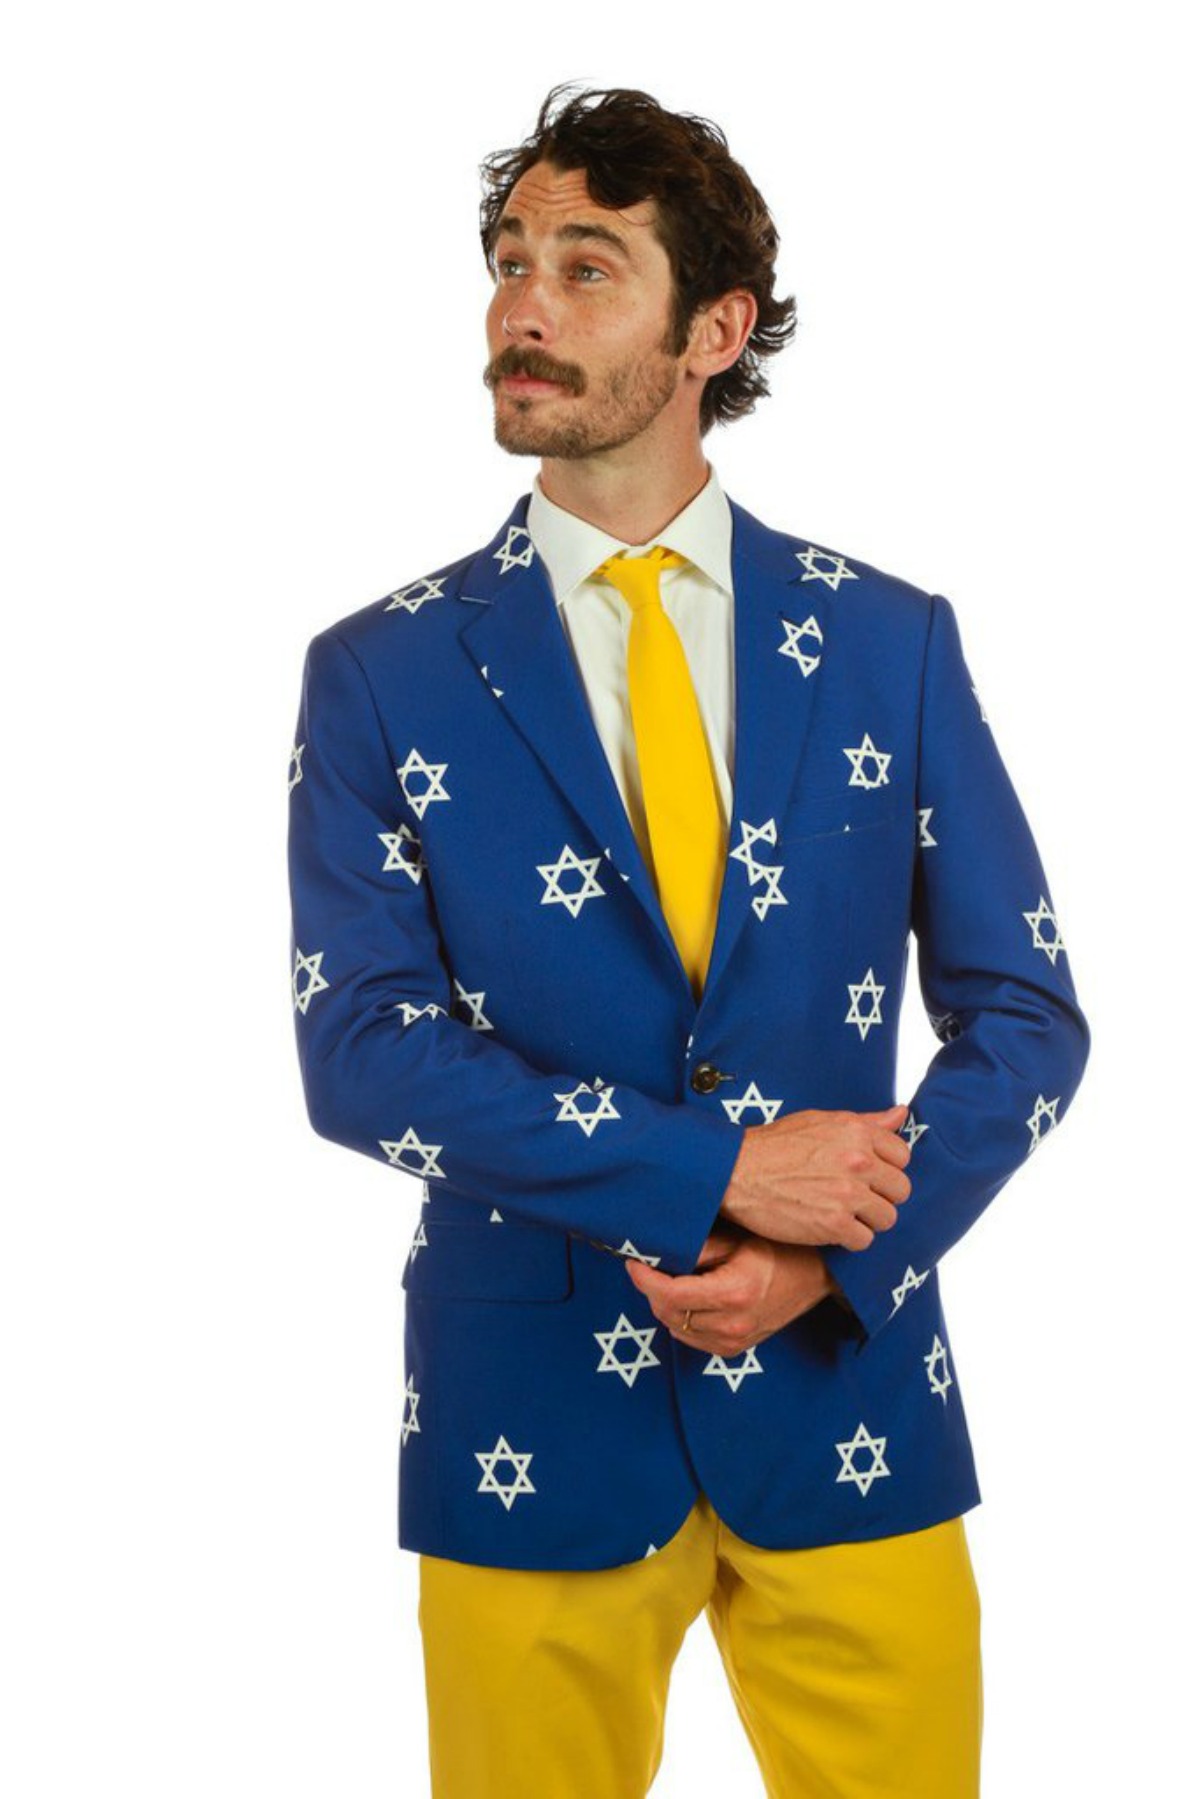 Rock Star of David Ugly Hanukkah Sweater Suit from Shinesty